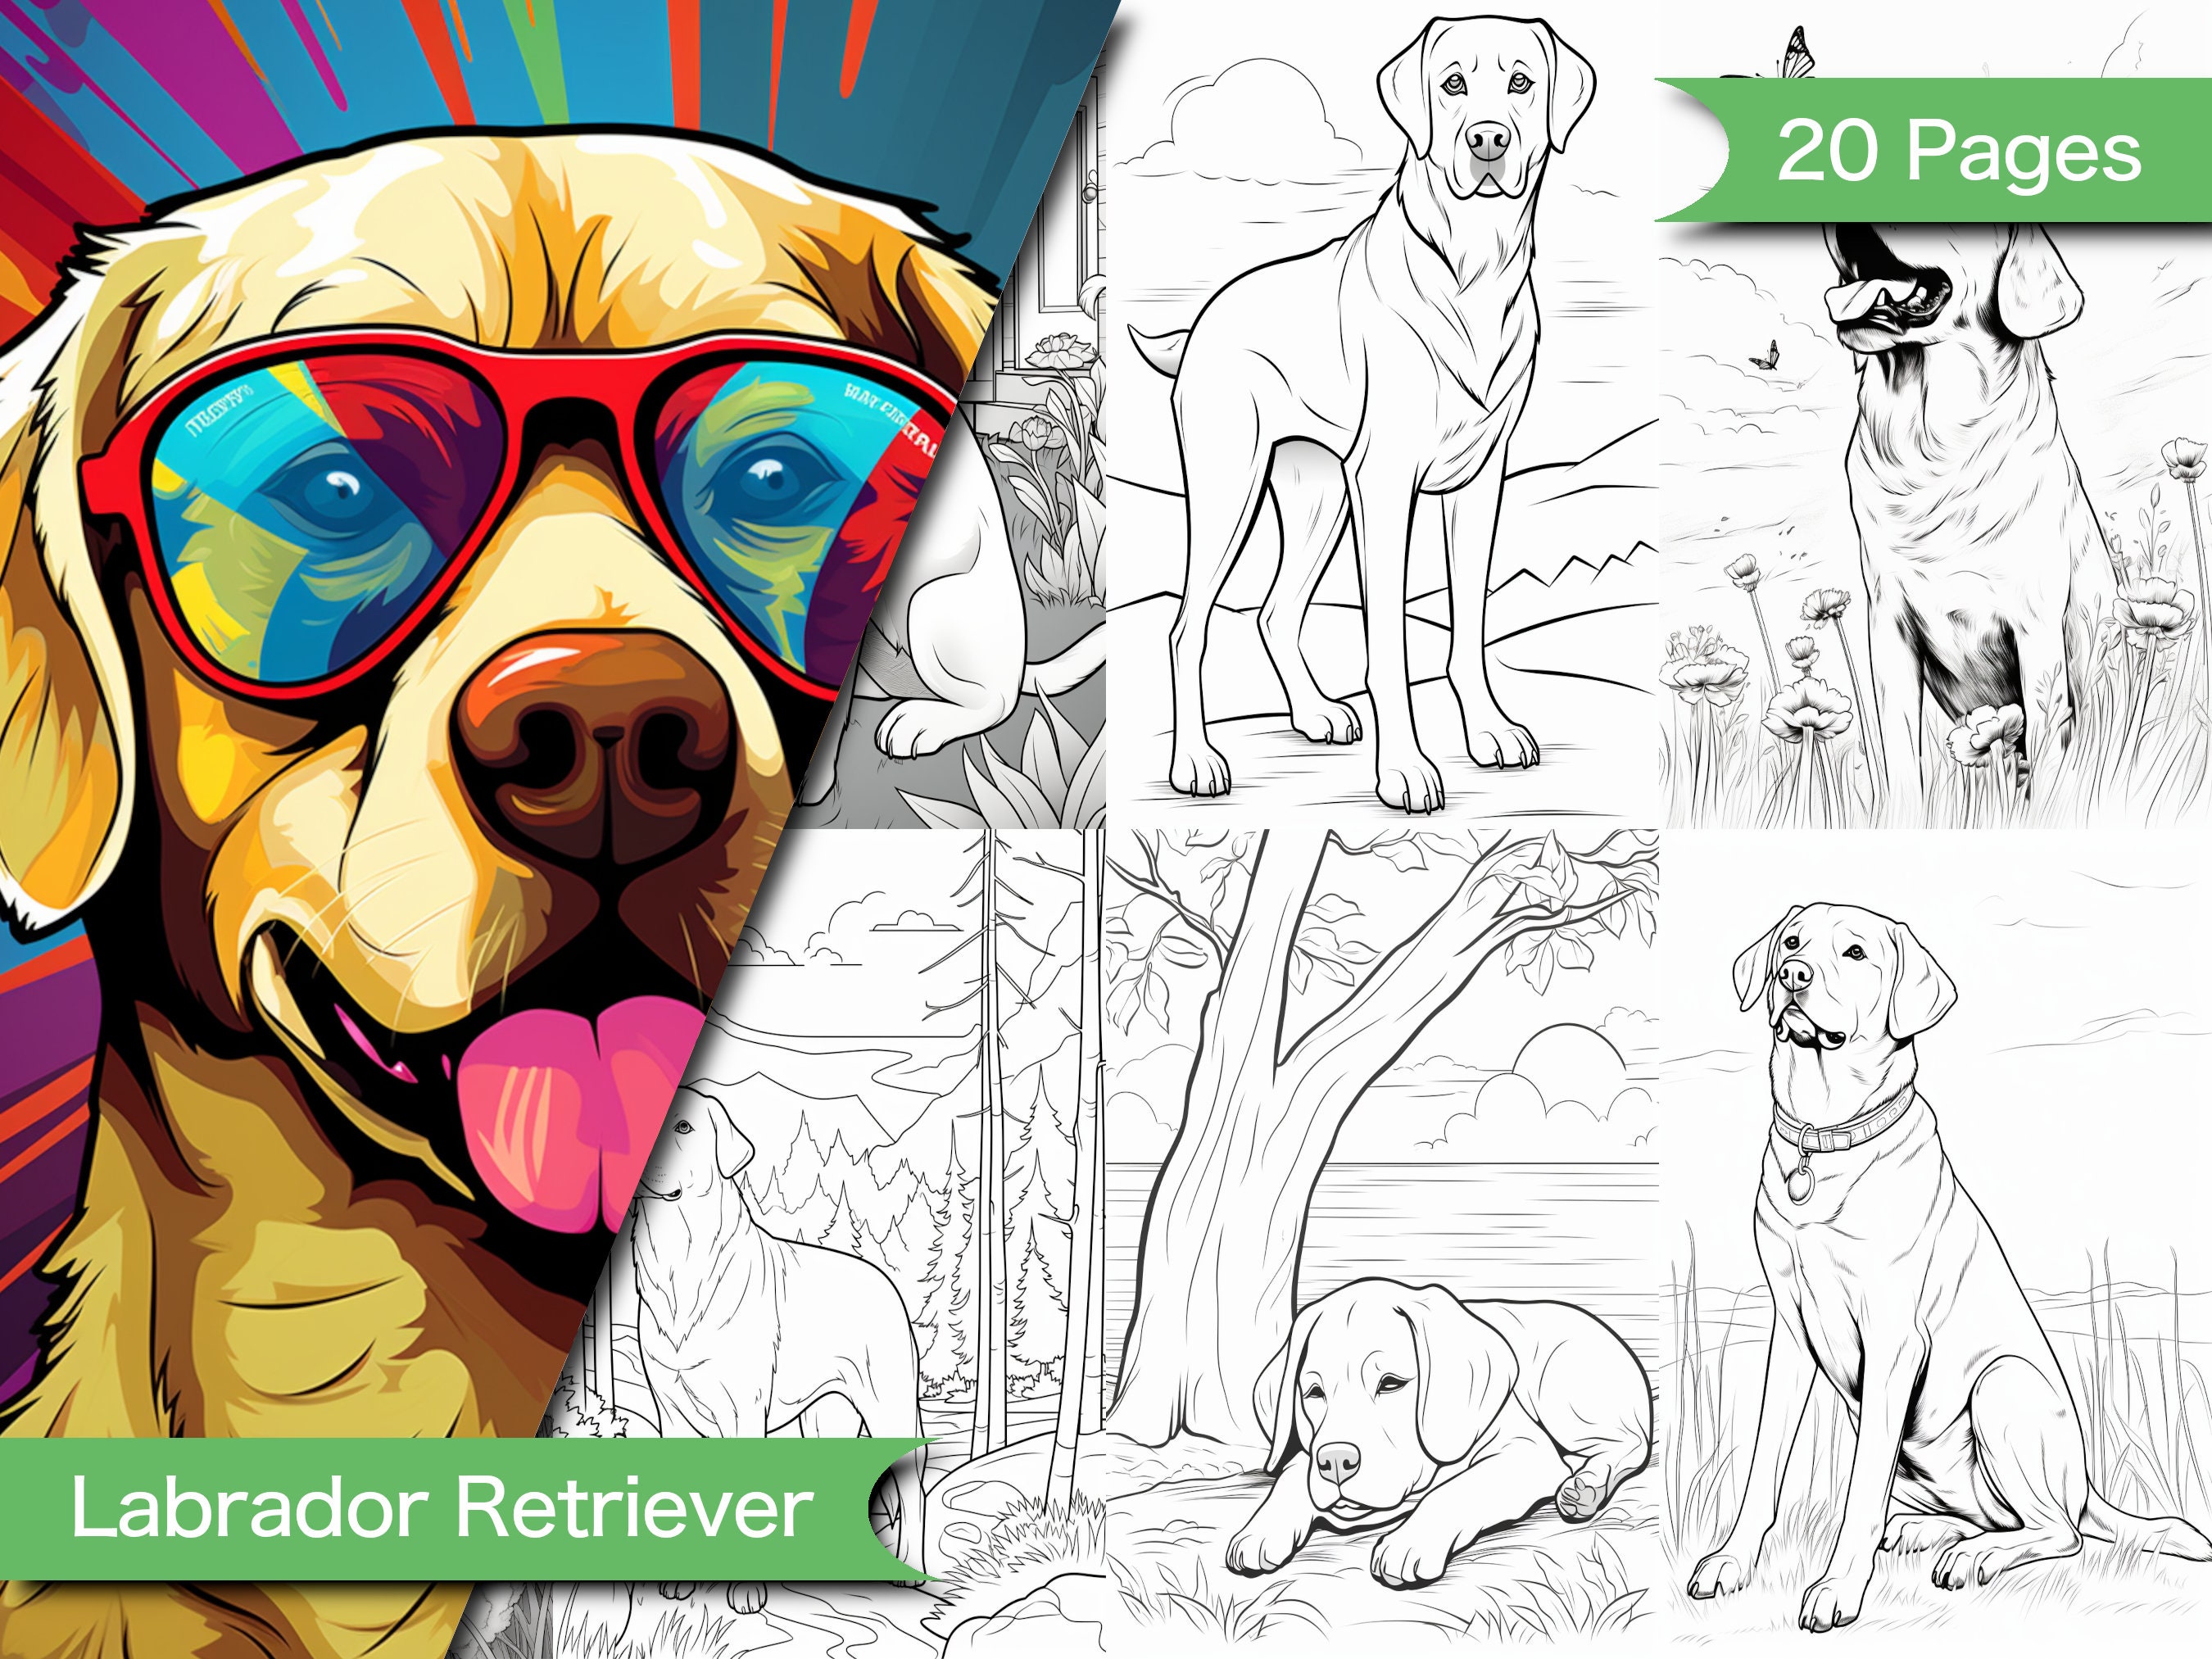 Printable labrador retriever coloring pages detailed designs for kids adults relaxing and creative activity